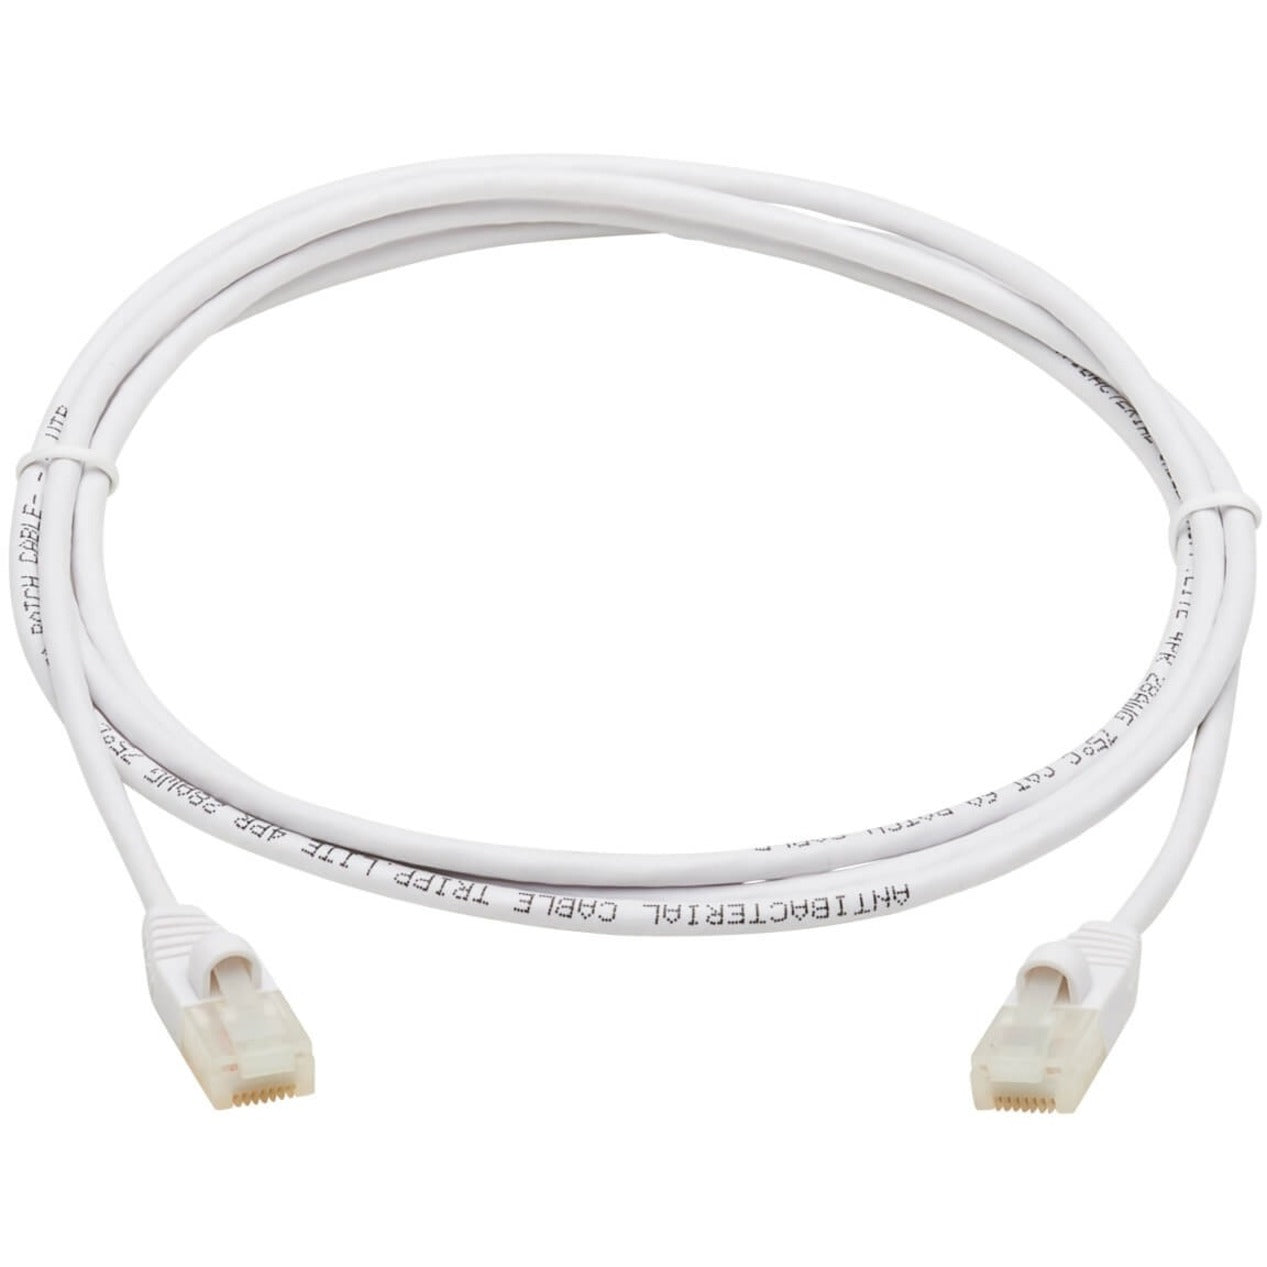 Tripp Lite N261AB-S05-WH Cat.6a UTP Network Cable, 5 ft, Gold Plated Connectors, Snagless Boot, 10 Gbit/s Data Transfer Rate